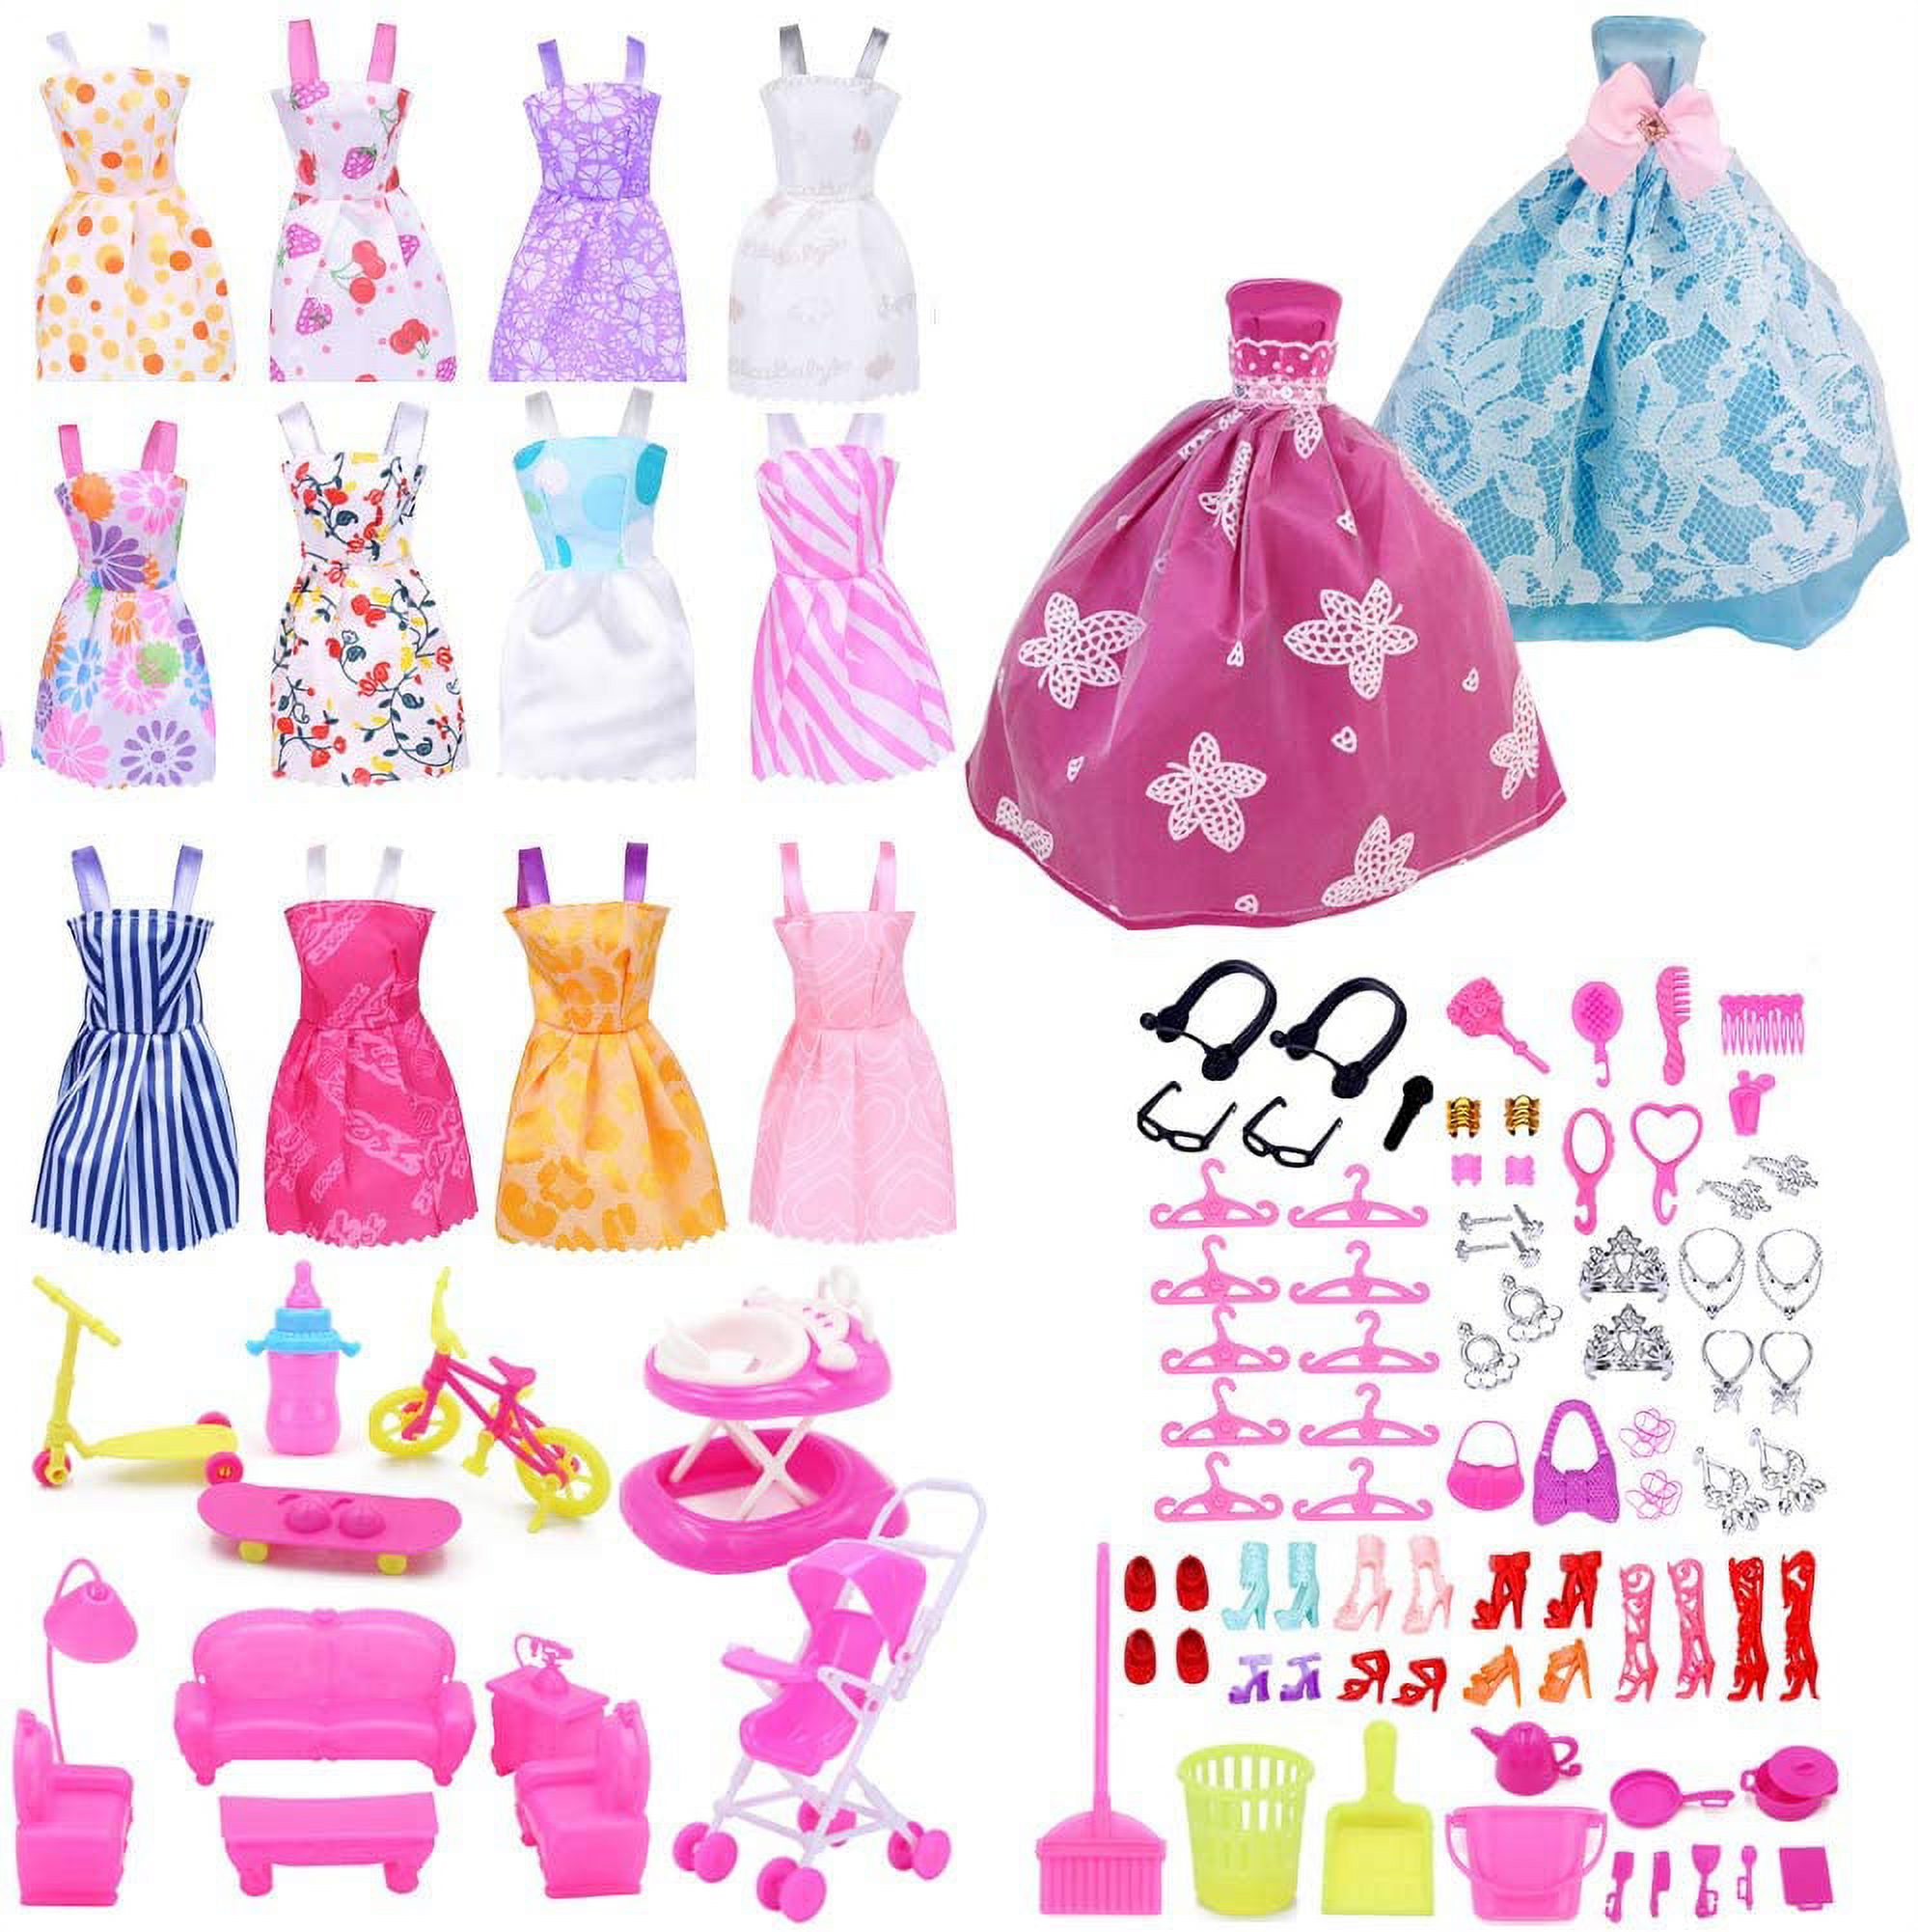 Eutenghao Eutenghao 123Pcs Clothes And Accessories For 11.5 Inch Dolls Contain 13 Party Gown Outfits Dresses For 11.5 Inch Doll Handmade Doll Wedding Dresses And 108Pcs Doll Accessories For 11.5 Inch - image 1 of 9